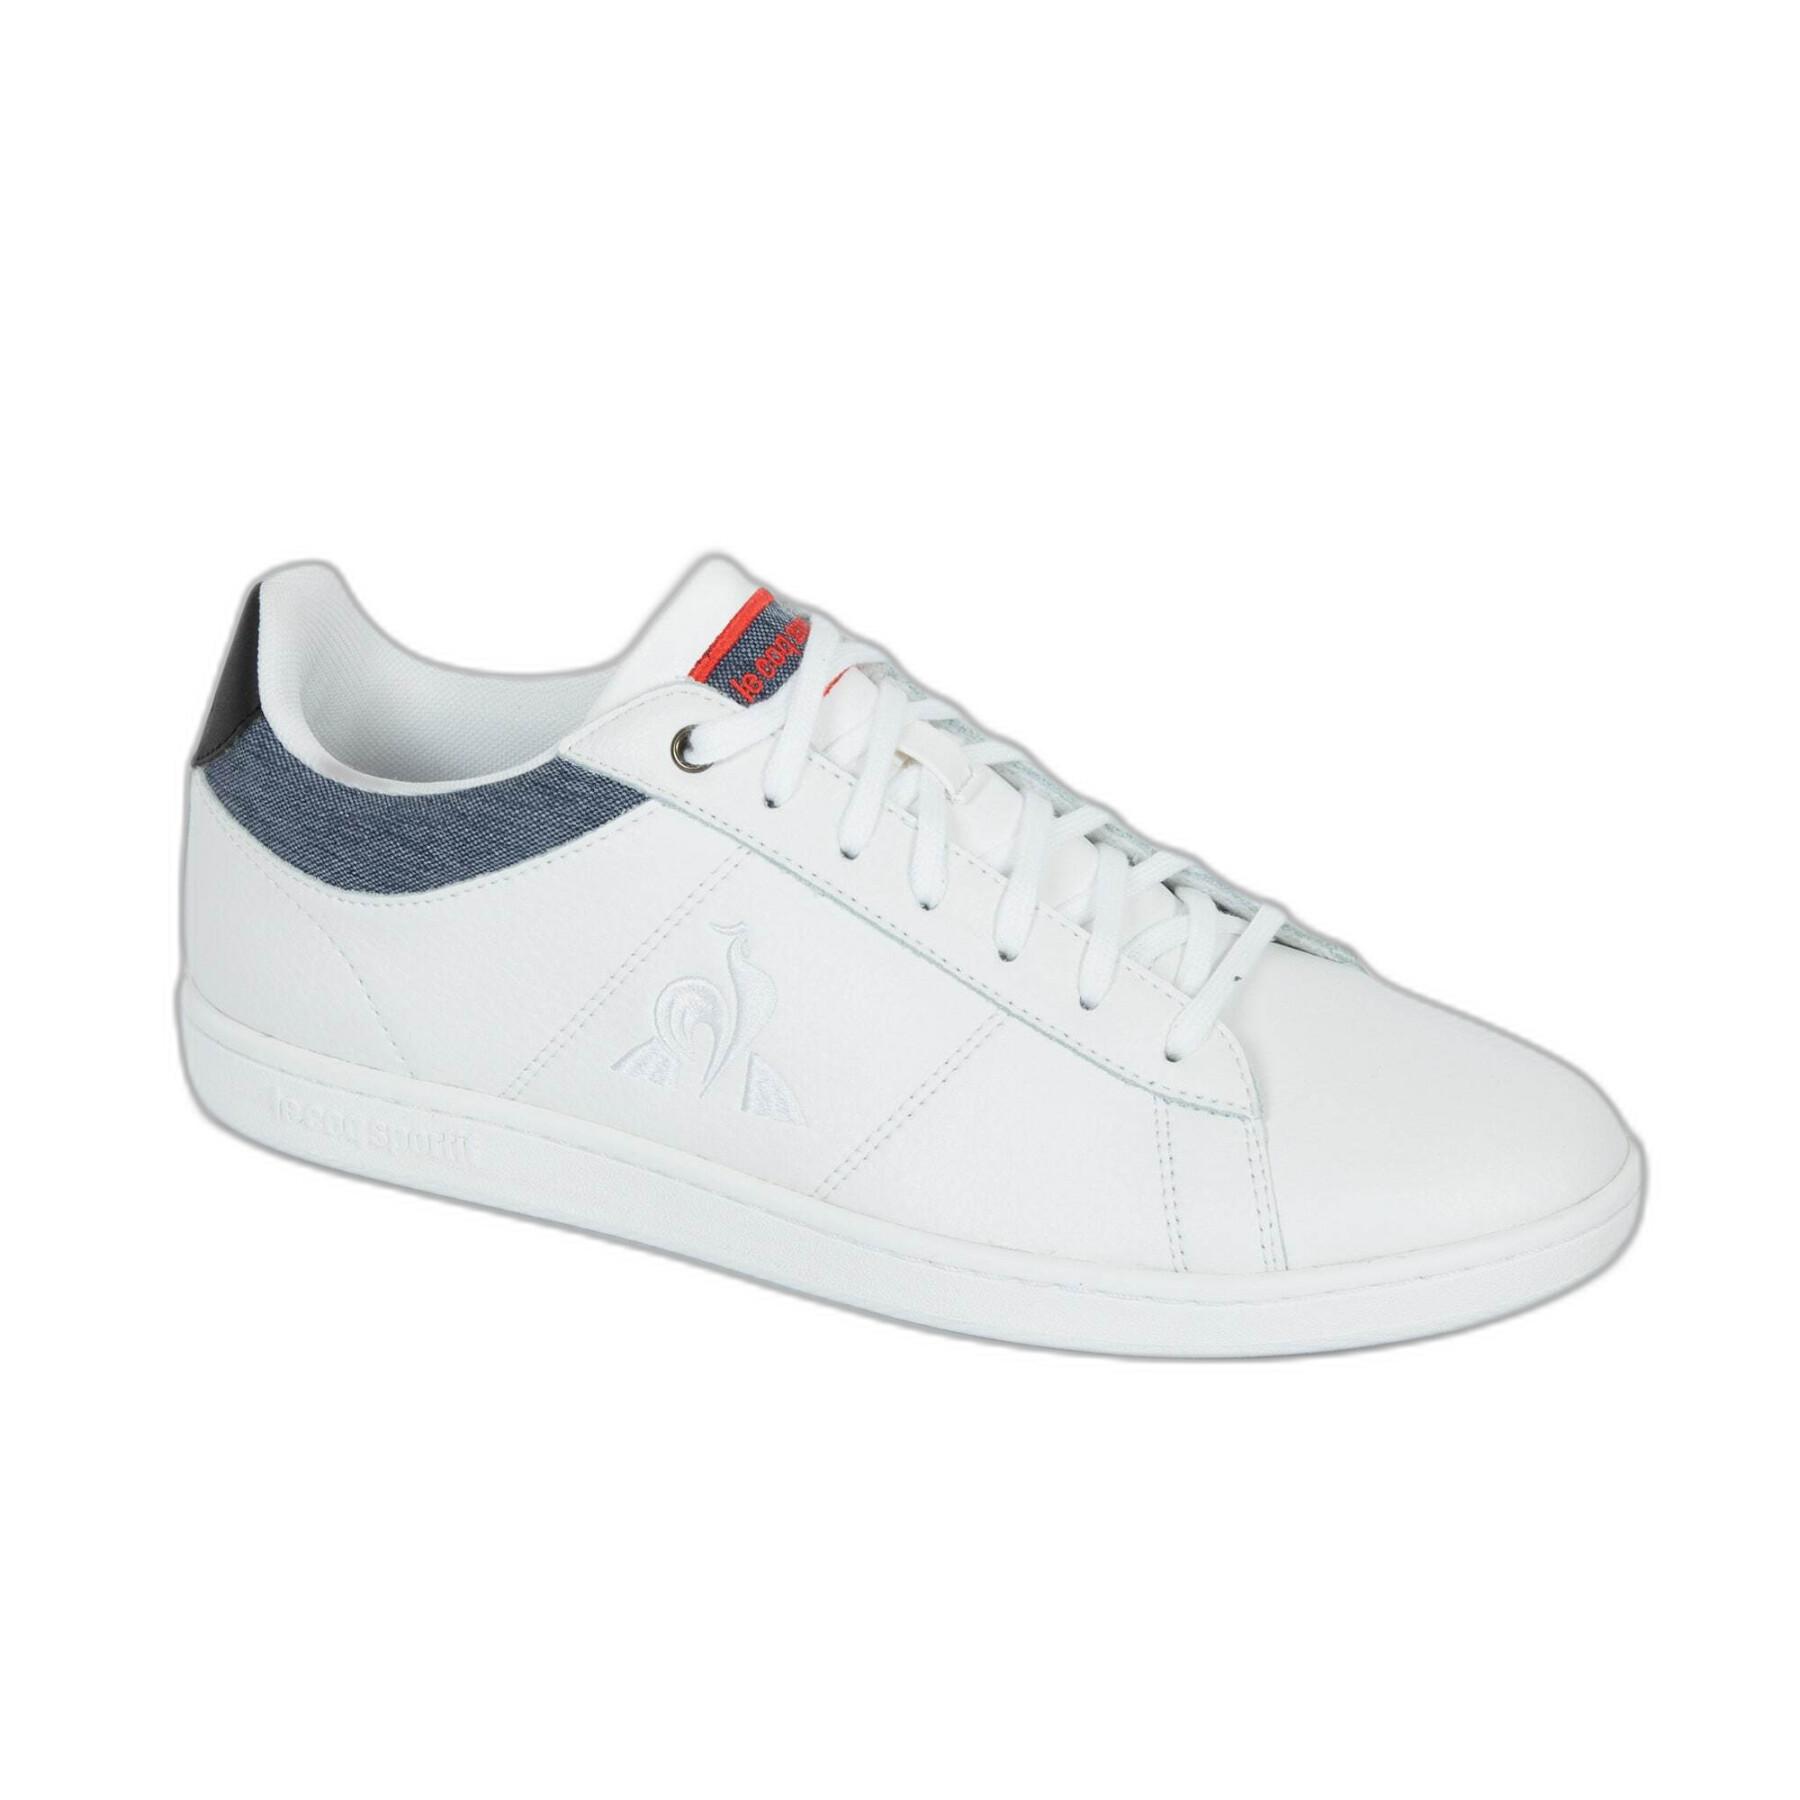 Formadores Le Coq Sportif Court Allure Workwear